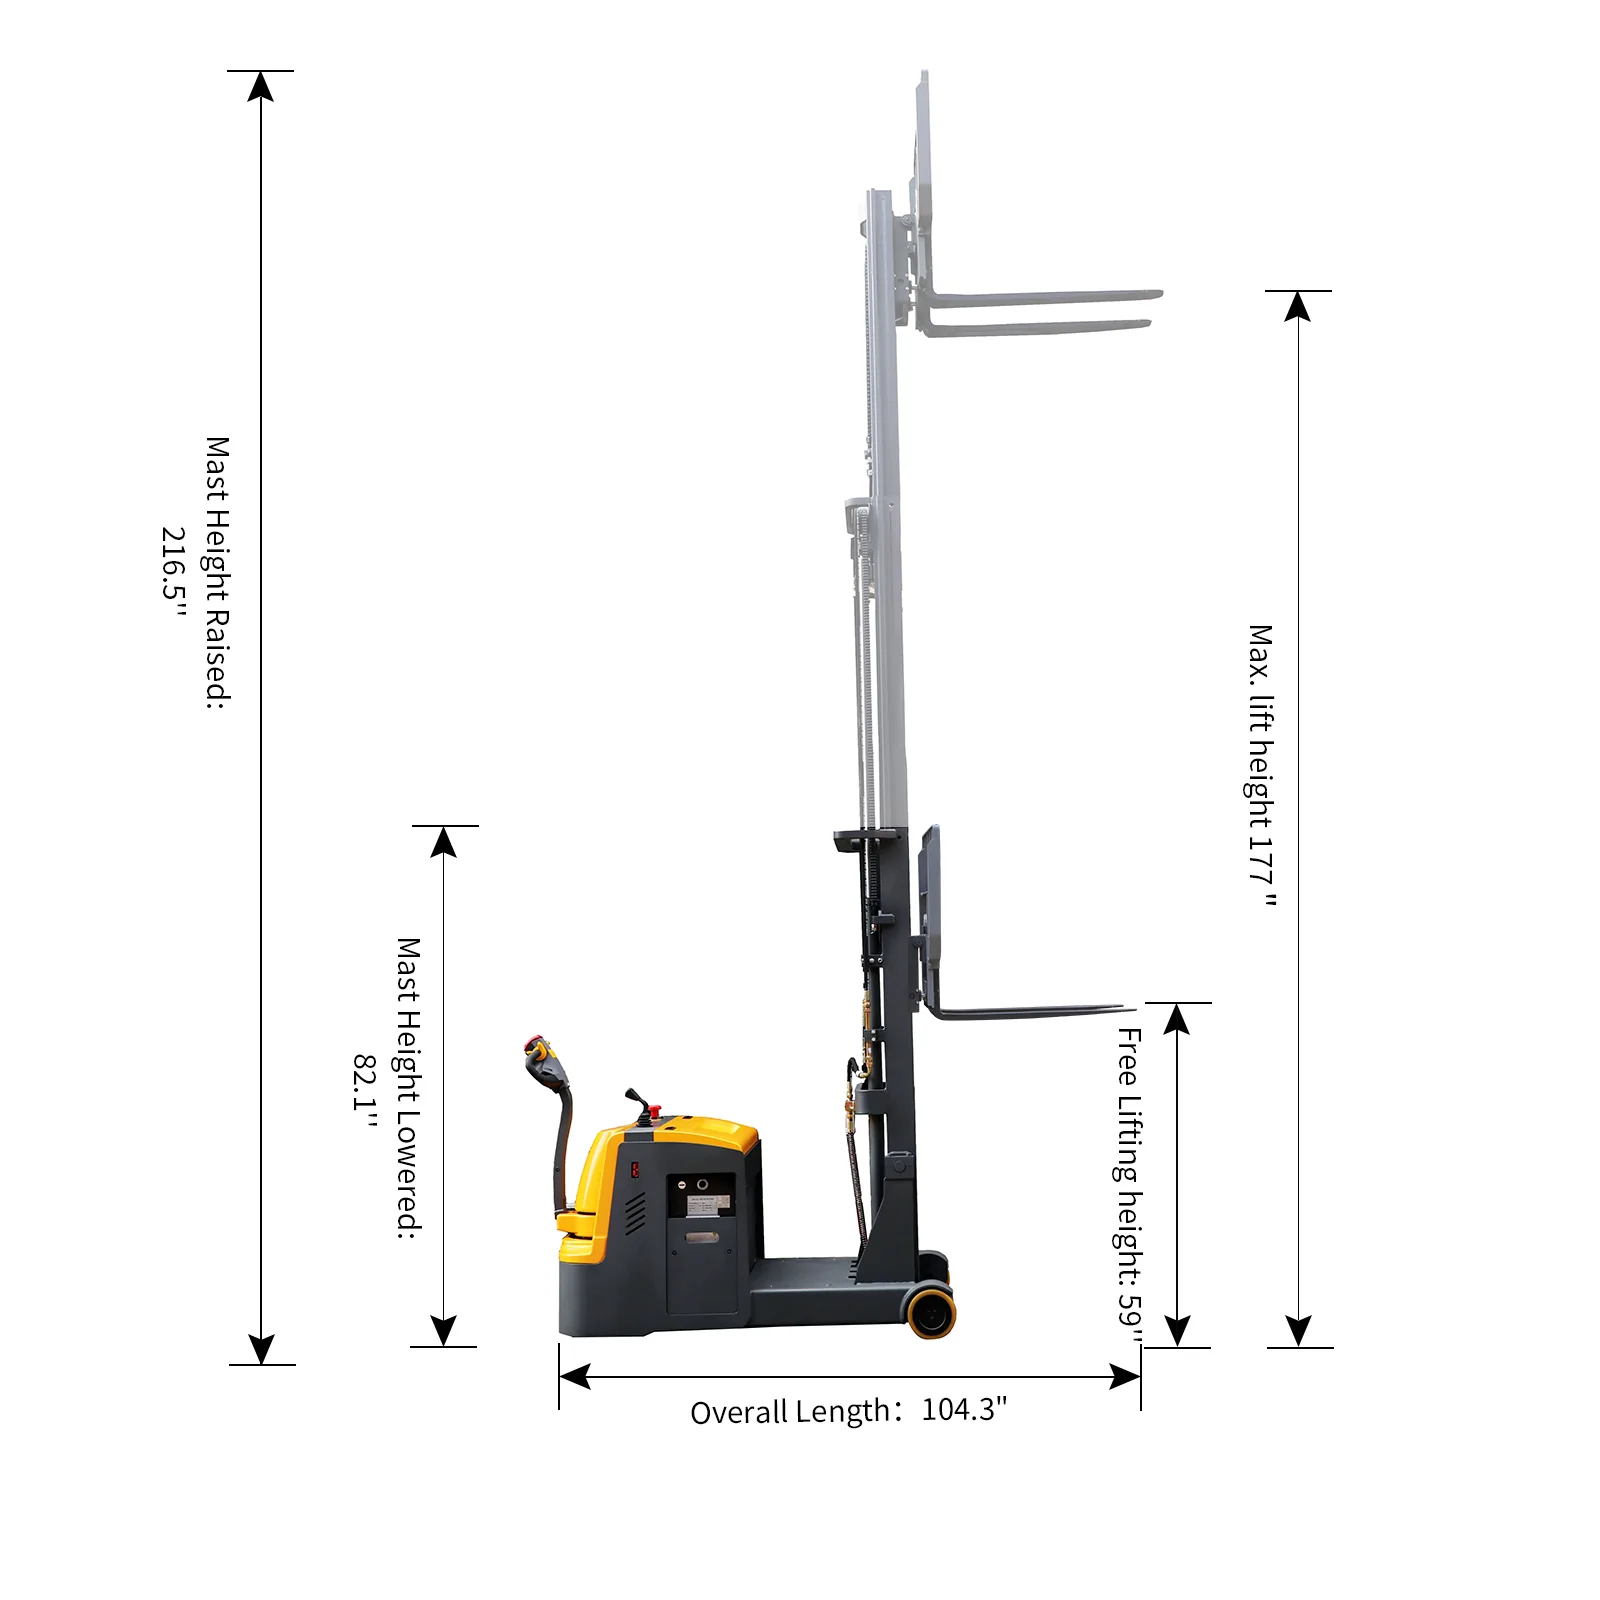 Apollolift, Apollolift A-3032 Counterbalanced Electric Stacker 177" Lifting Height 3300 lbs. Capacity New